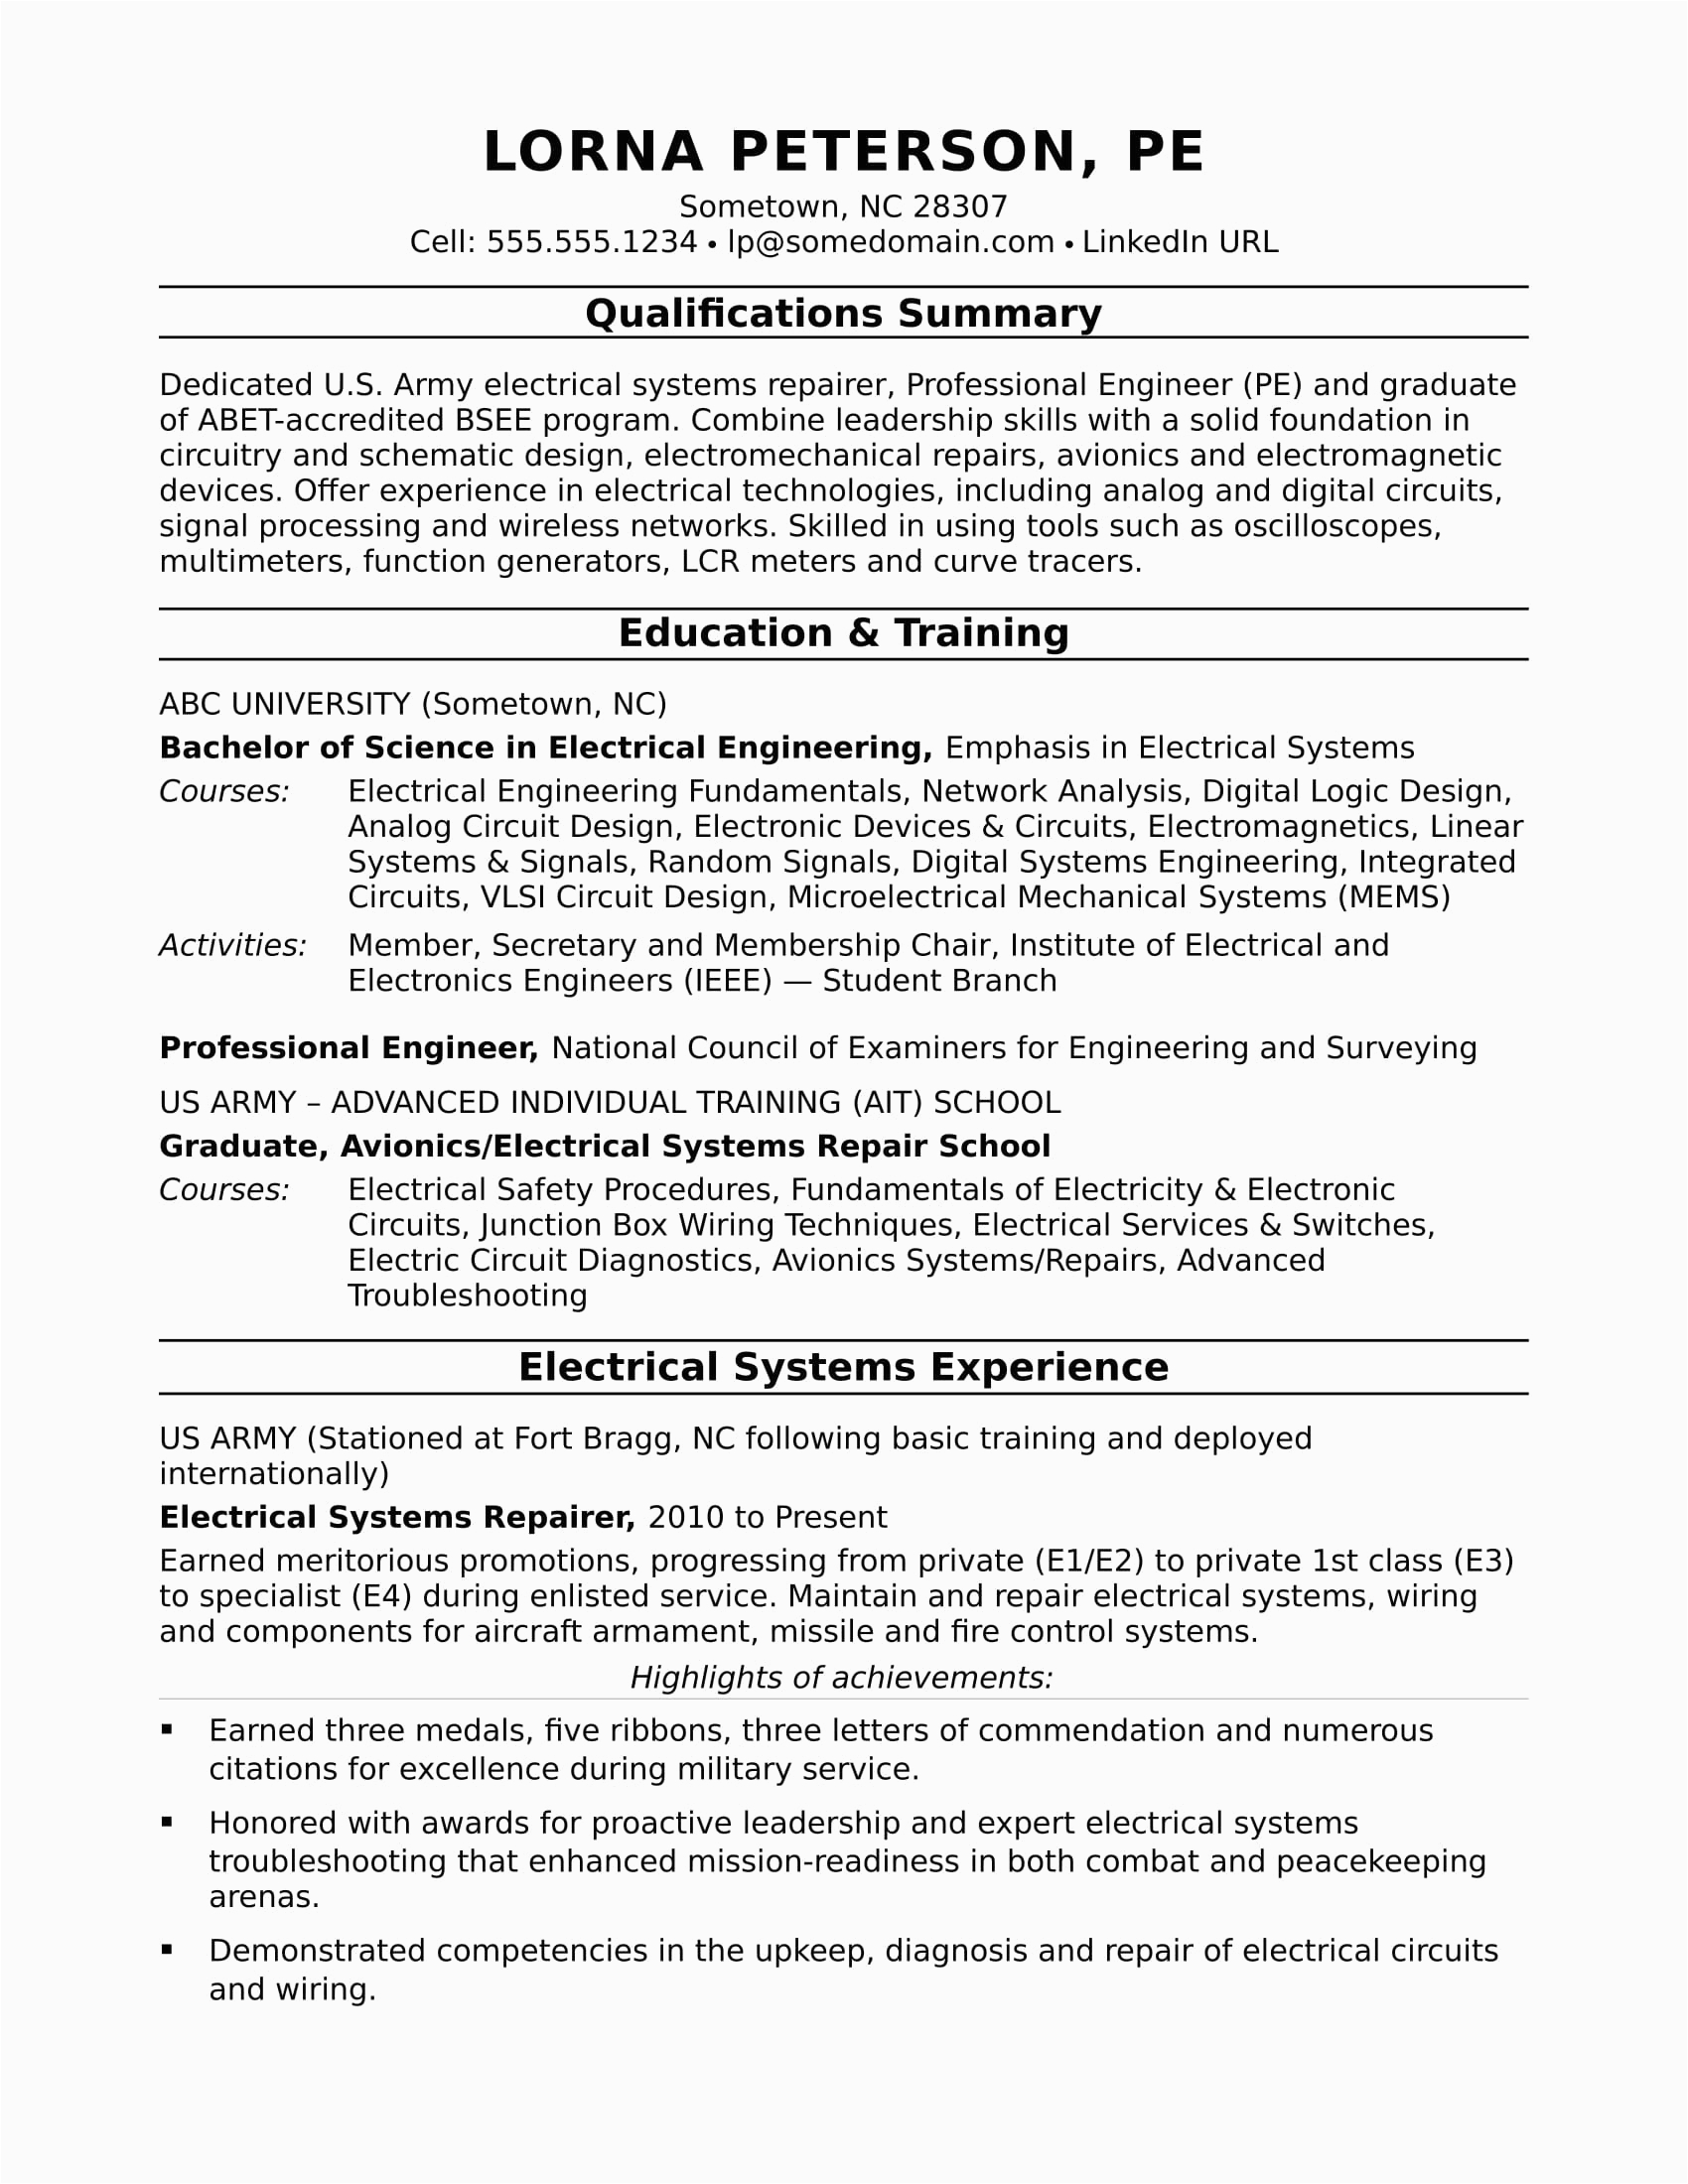 Electrical and Instrumentation Engineer Resume Sample Resume Example Electronic Engineer Electronics Engineer Resume Sample